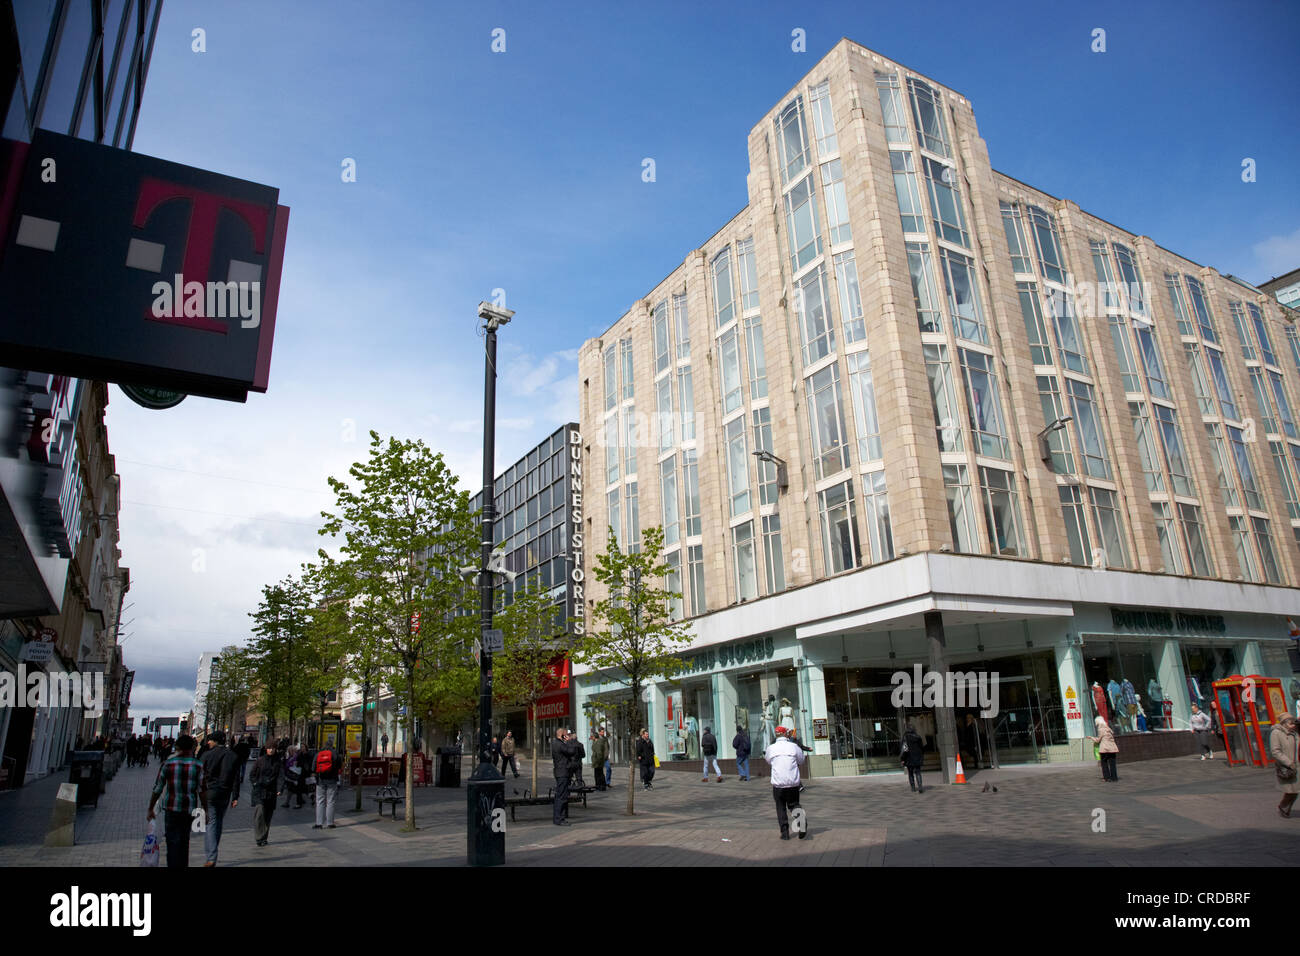 Dunnes stores Sauchiehall Street shopping area glasgow scotland uk Banque D'Images